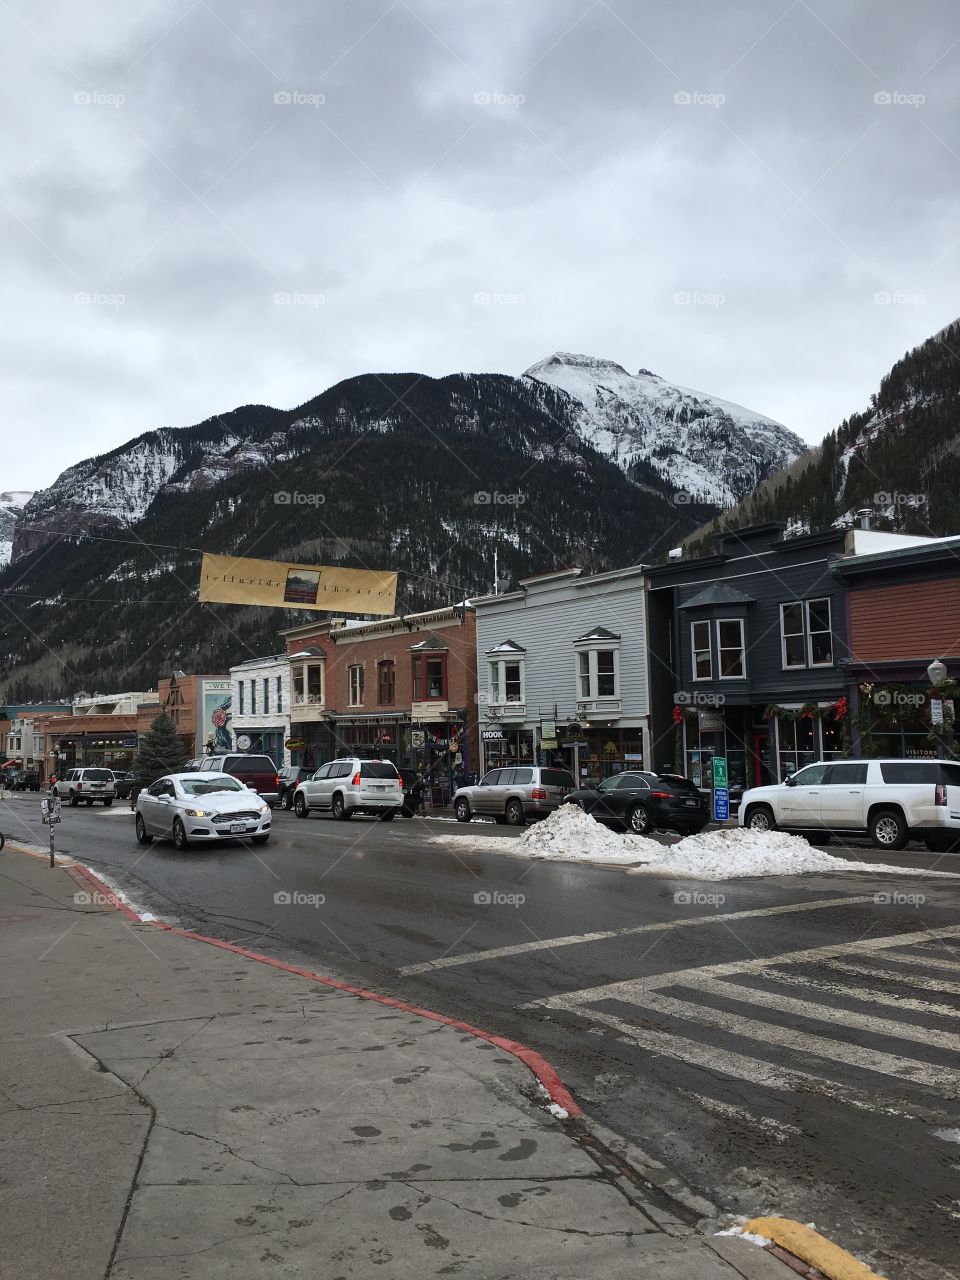 The beautiful city of Telluride, CO is perfectly situated in the midst of the picturesque Rocky Mountains. 